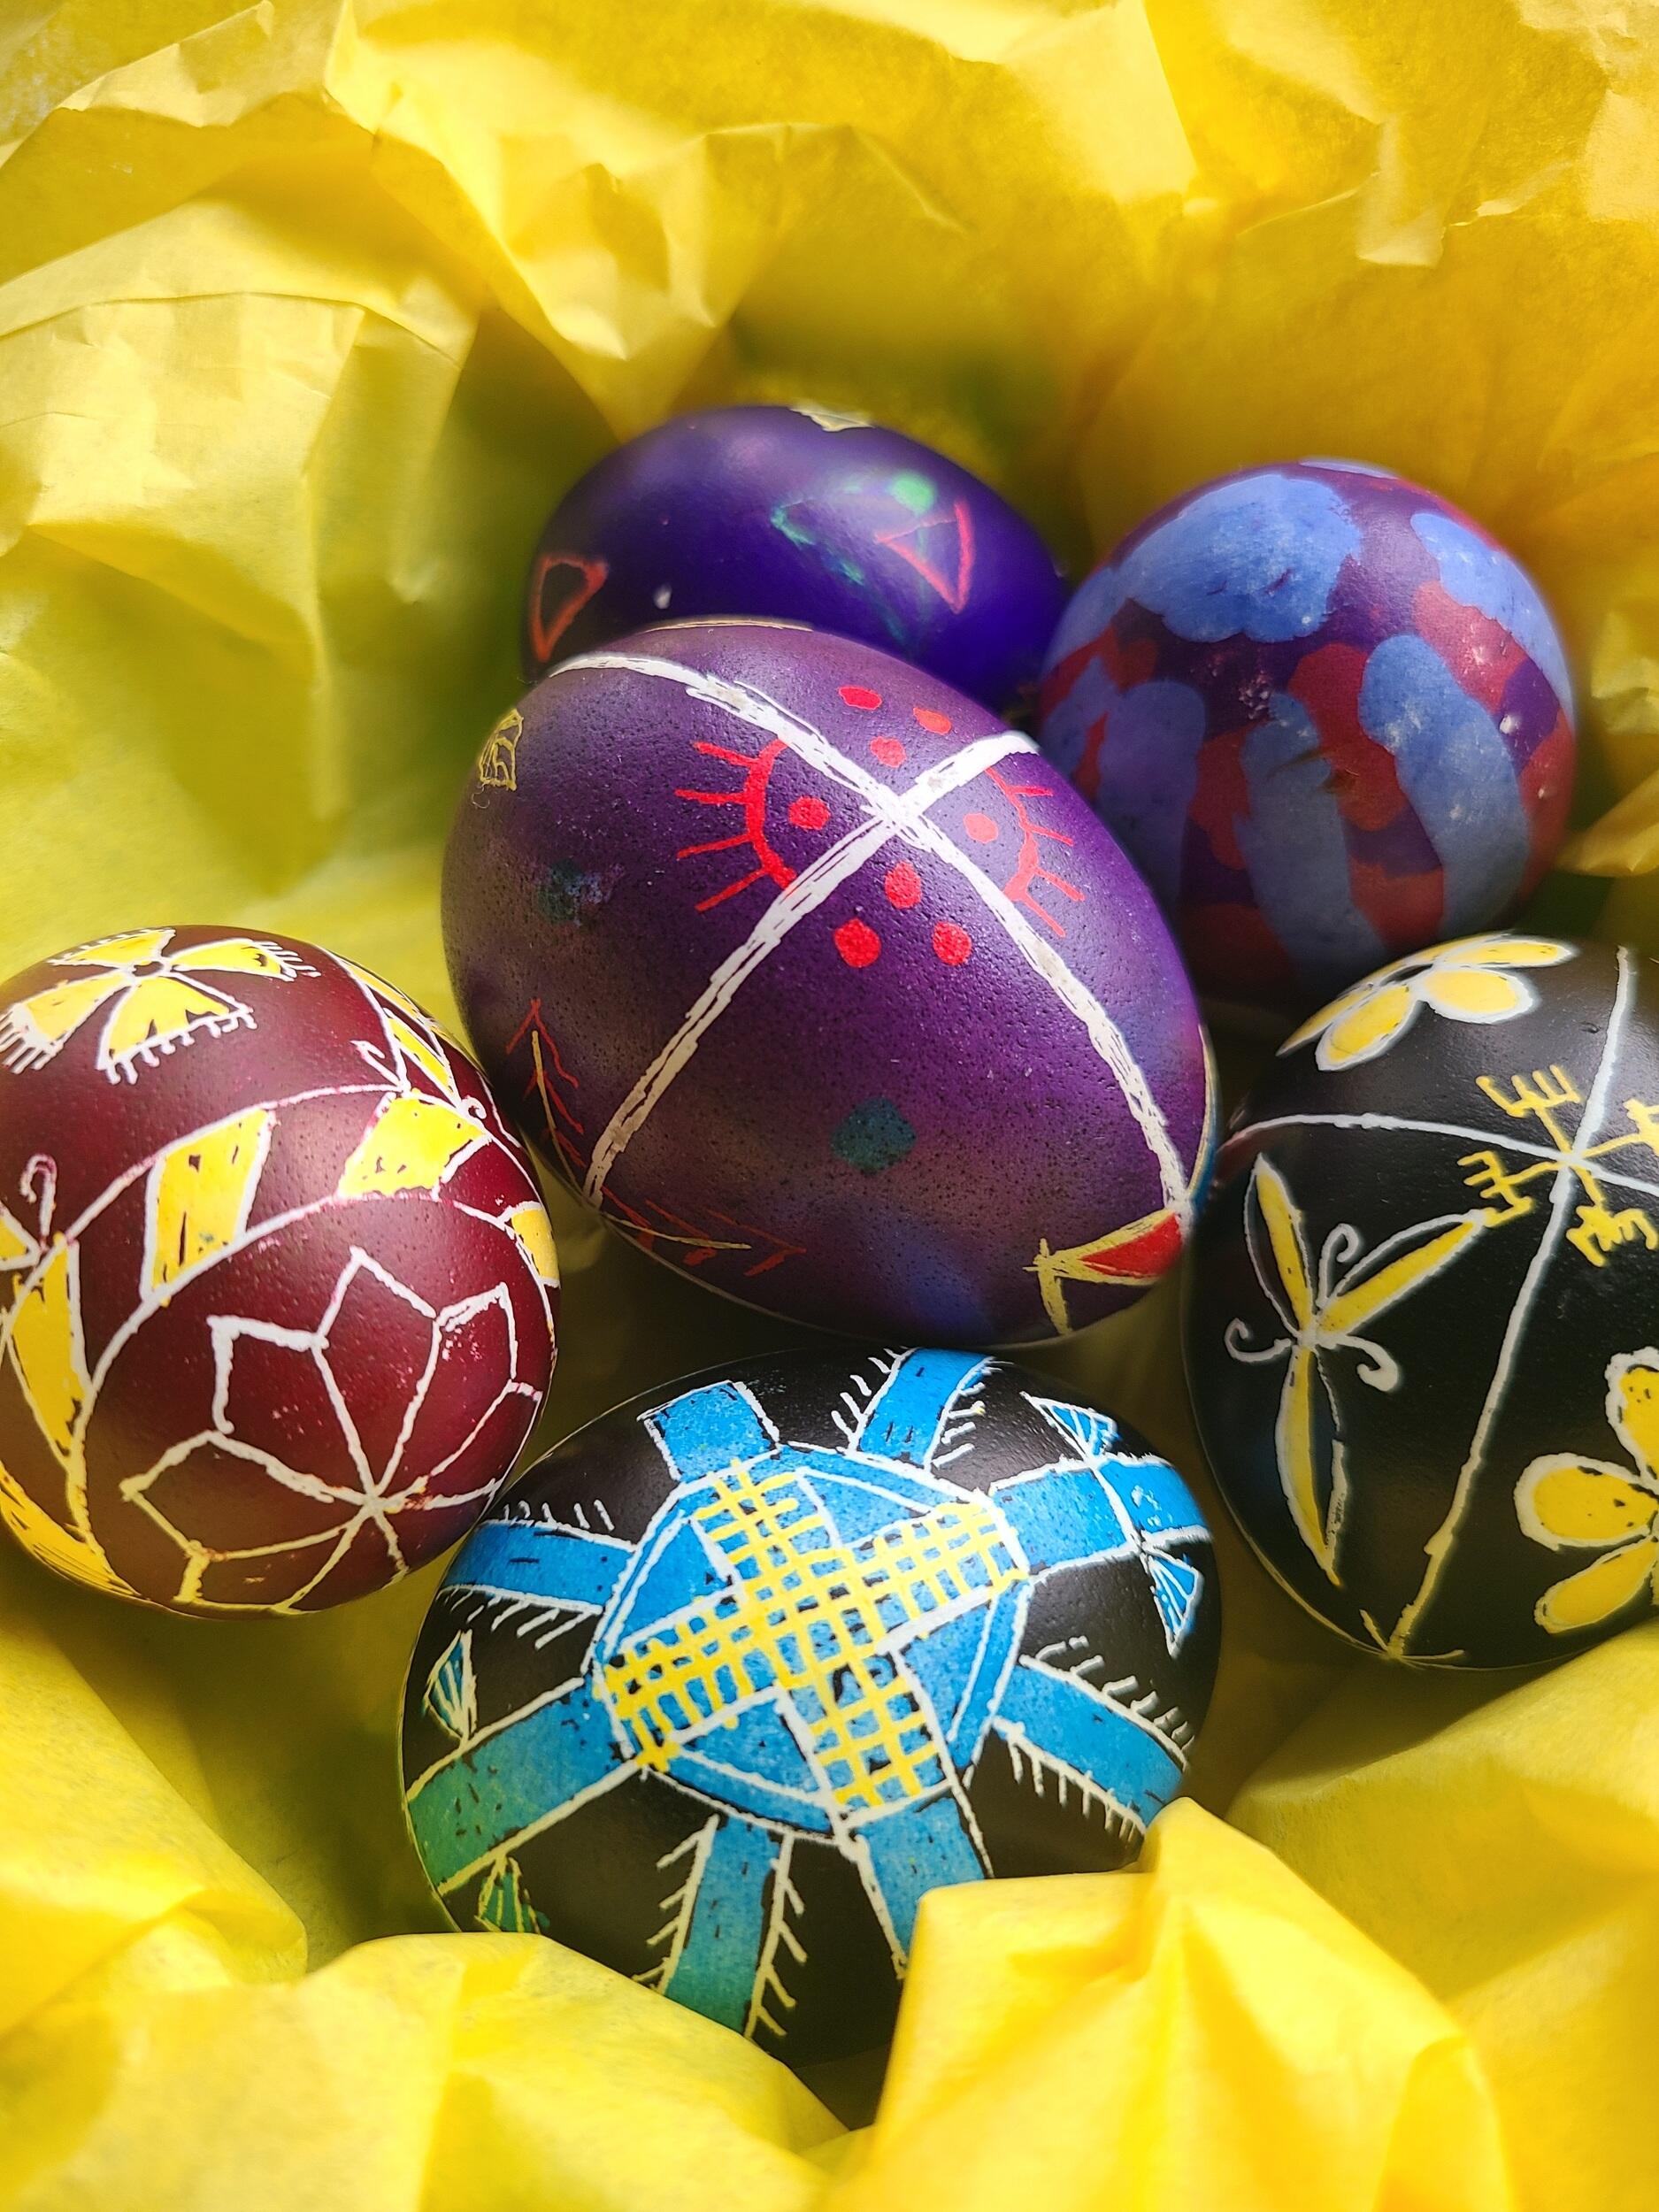 Five eggs with colorful patterns sitting on yellow tissue paper